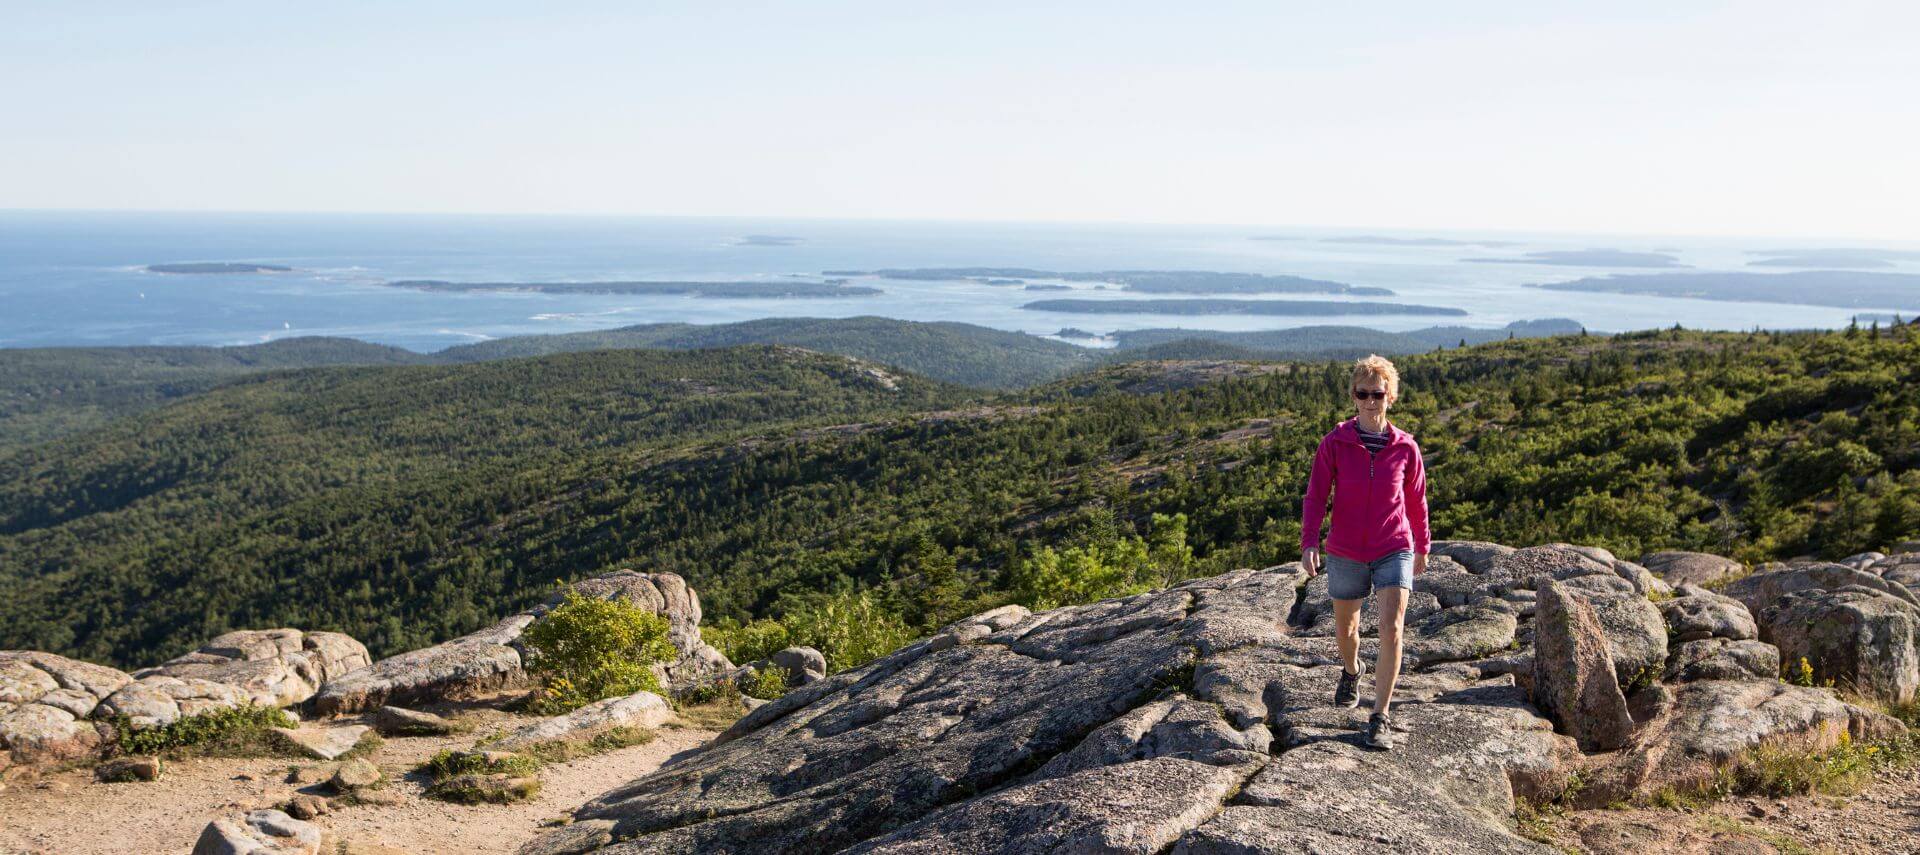 A woman is hiking above the coast of Maine. A view of the Atlantic Ocean in the background.